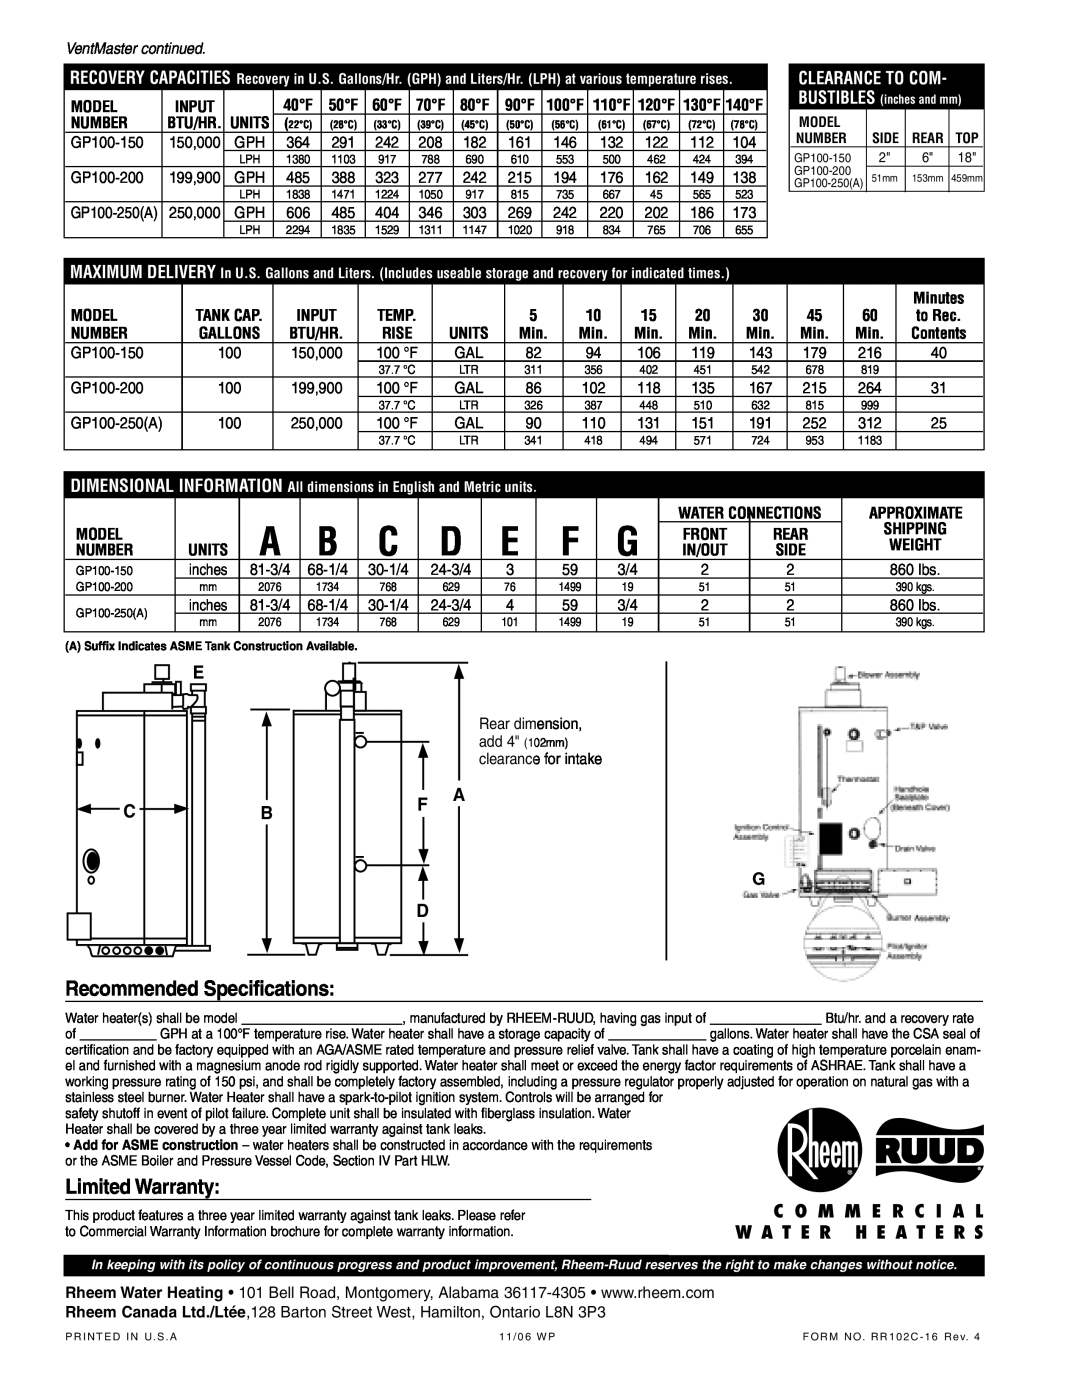 Rheem Direct Vent Gas Commercial Water Heater Recommended Specifications, Limited Warranty, F A D, Clearance To Com, Model 